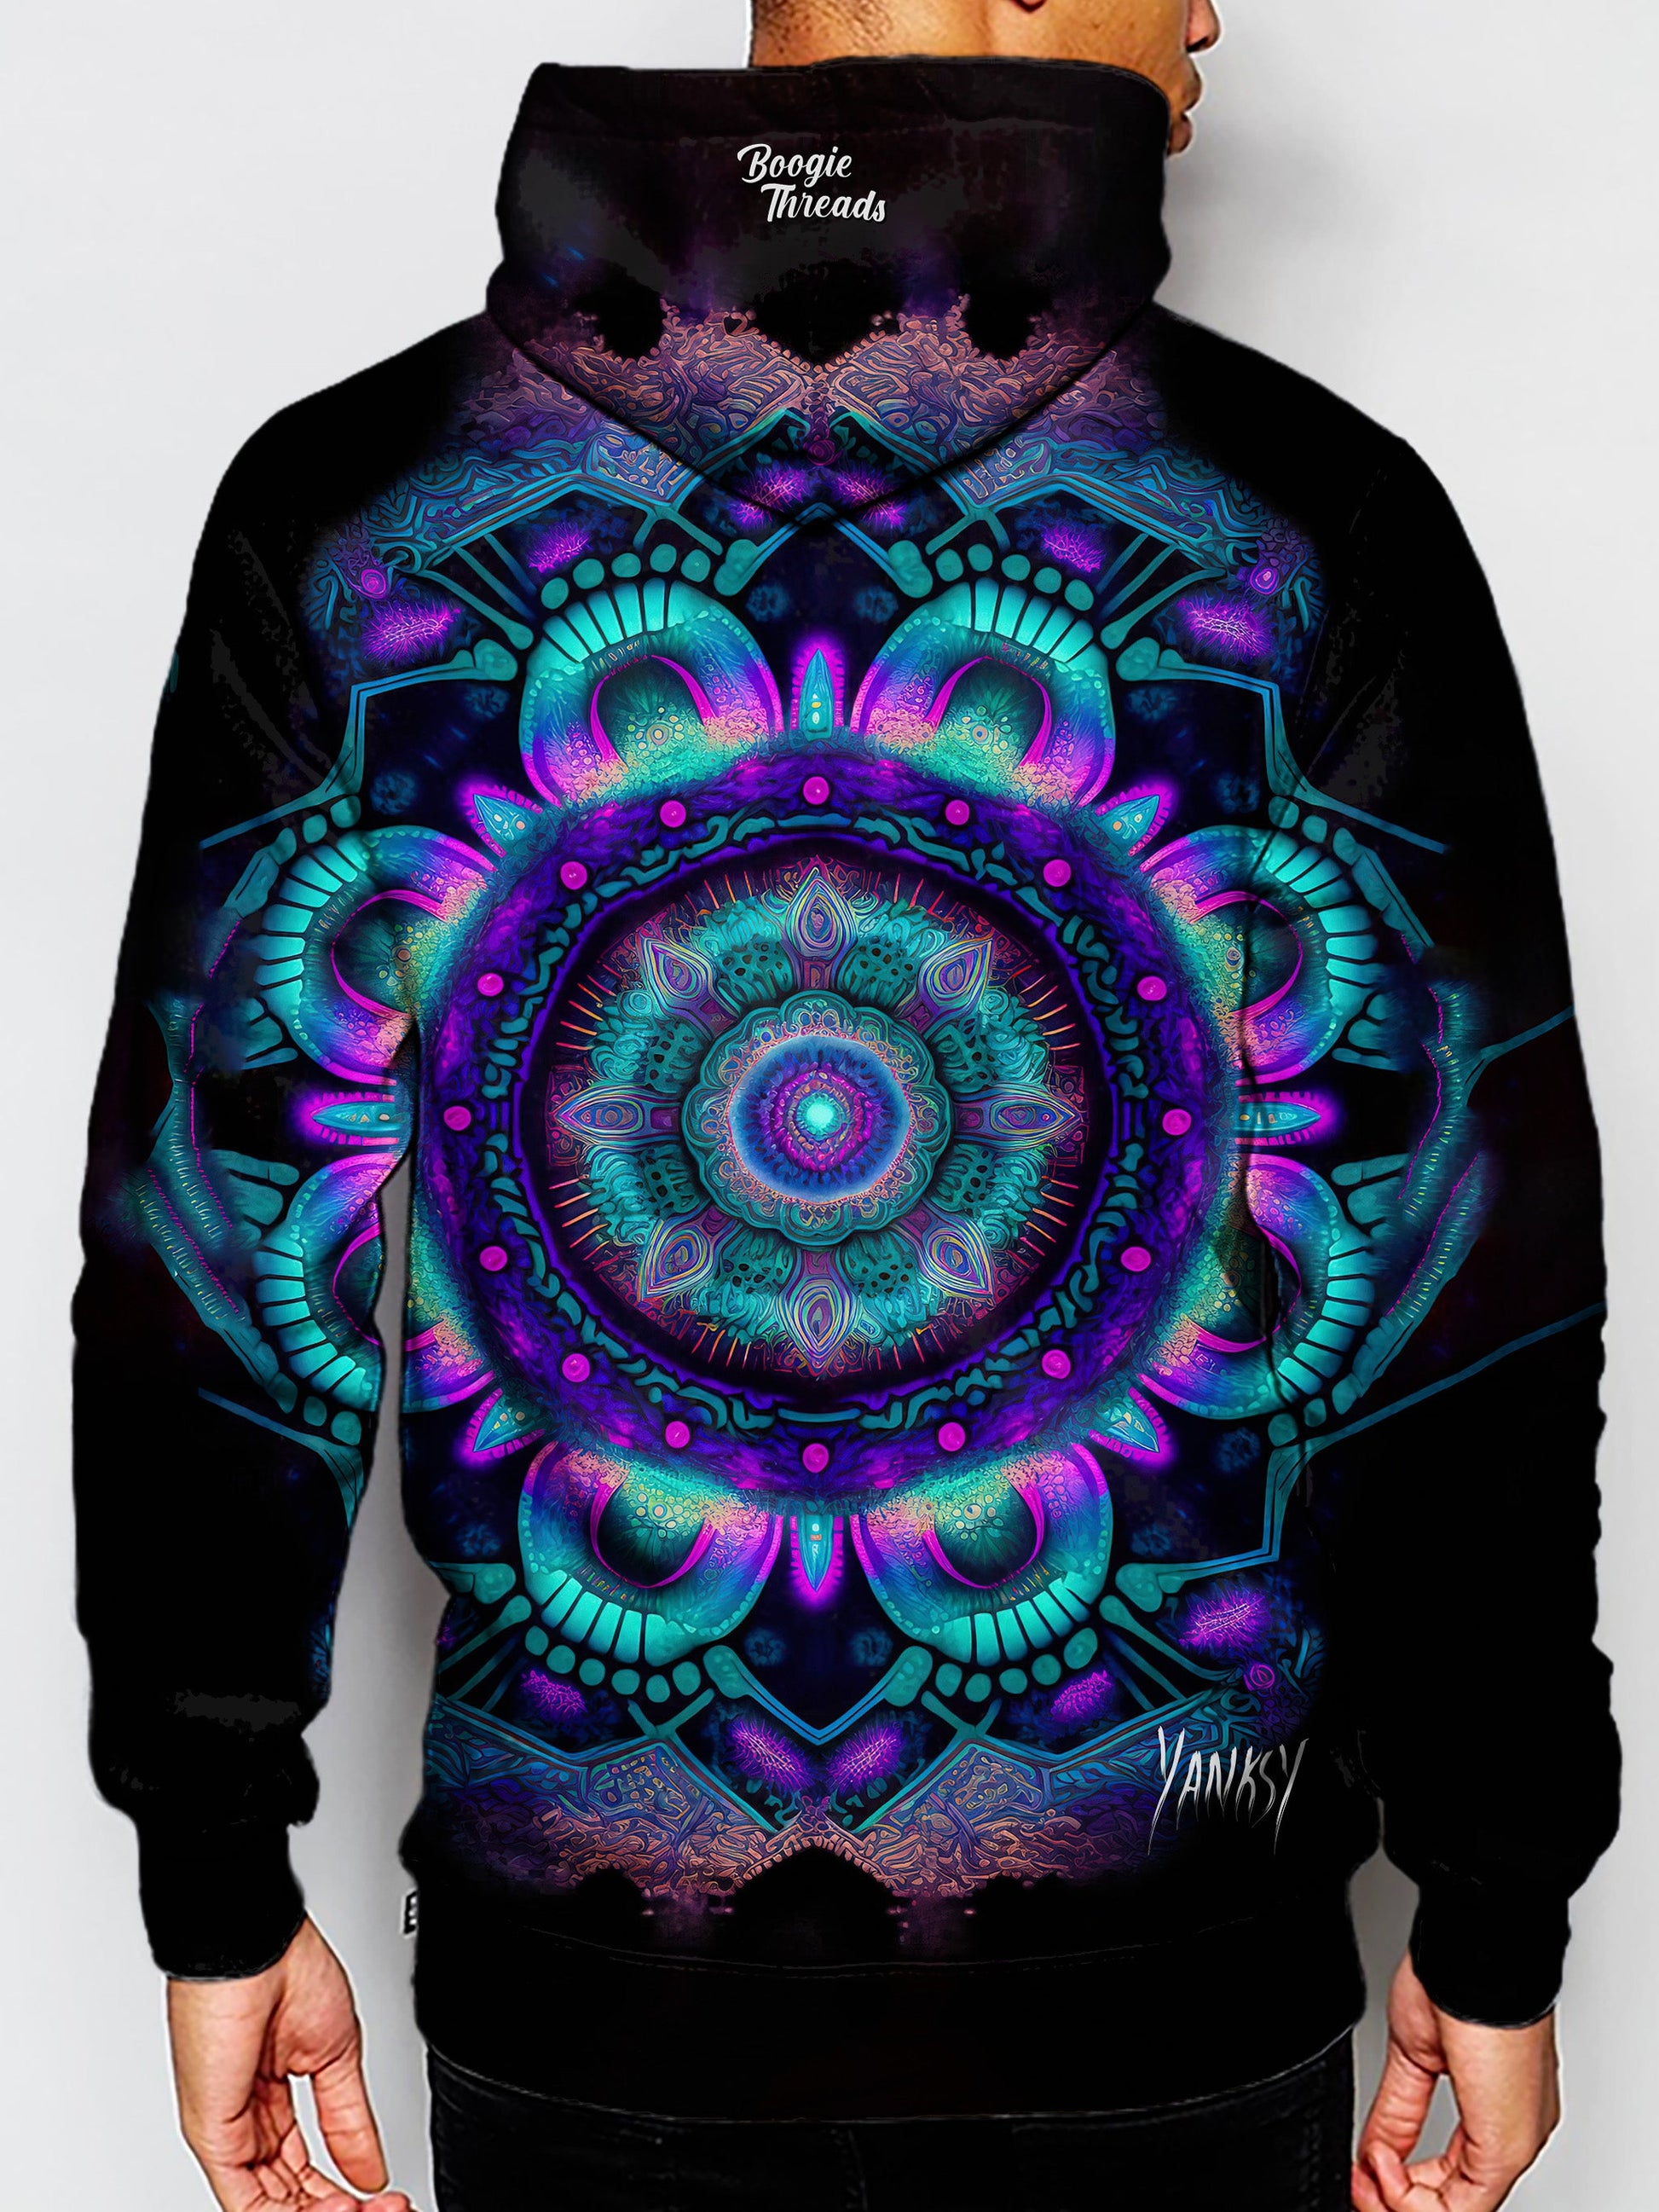 Turn heads wherever you go with this mesmerizing and trippy hoodie